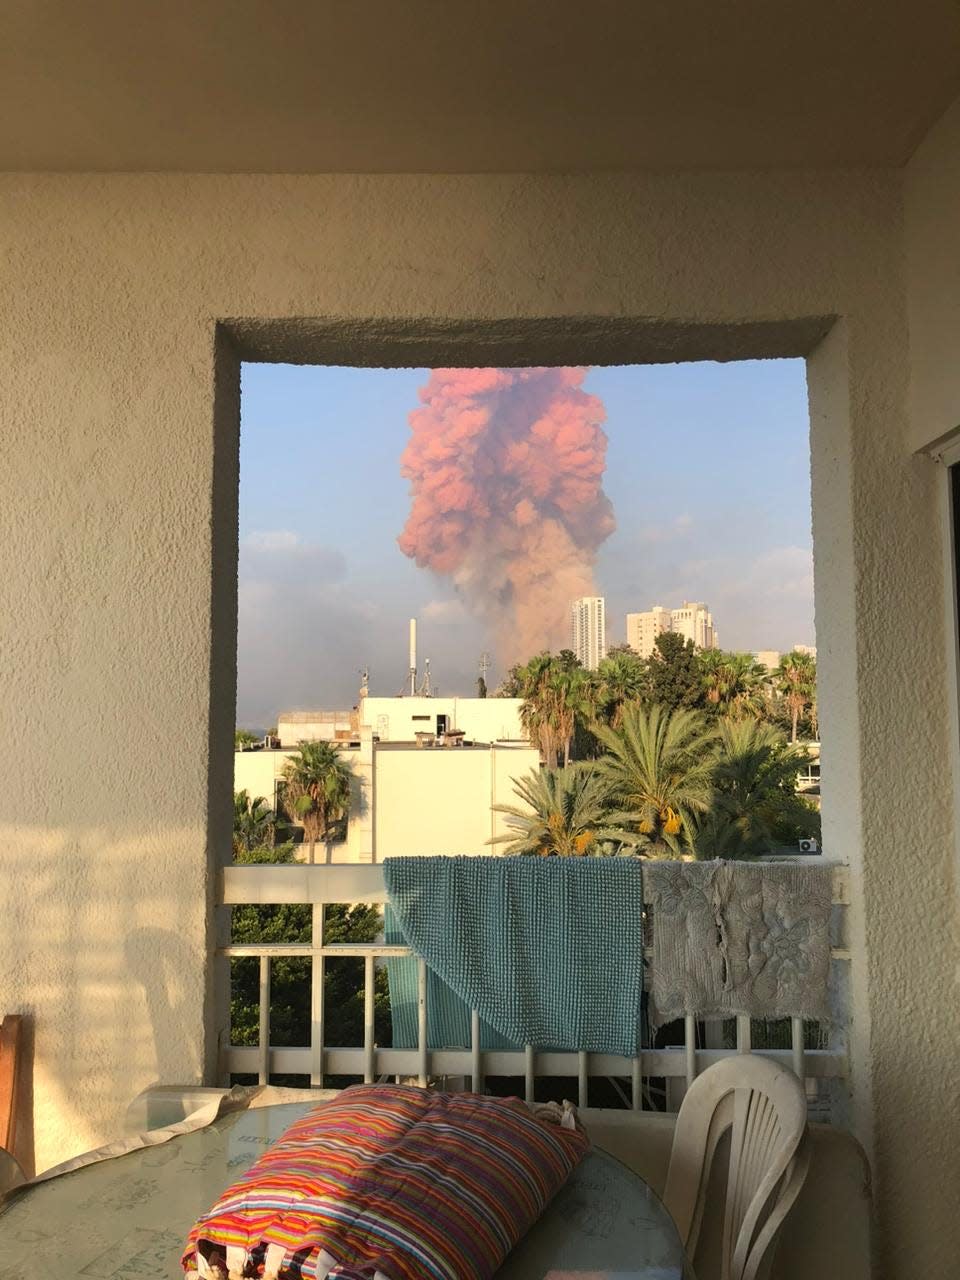 Joumana Christine Asfour's family's house in Aug. 4, 2020, and the Beirut explosion.